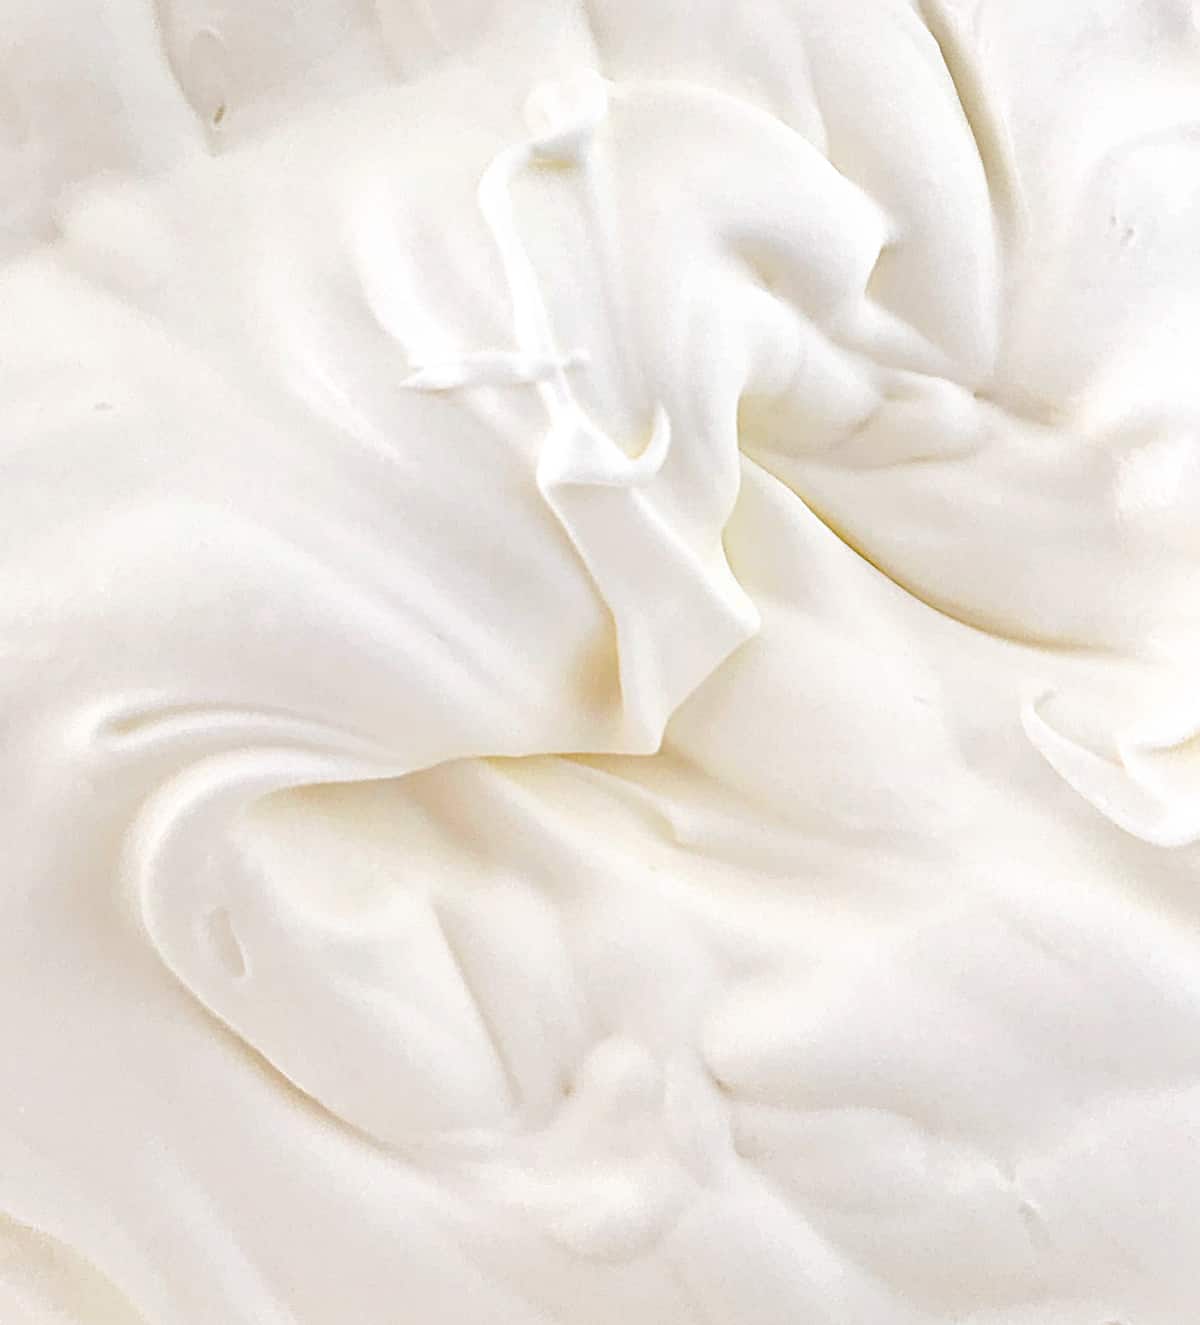 Whipped cream close-up.